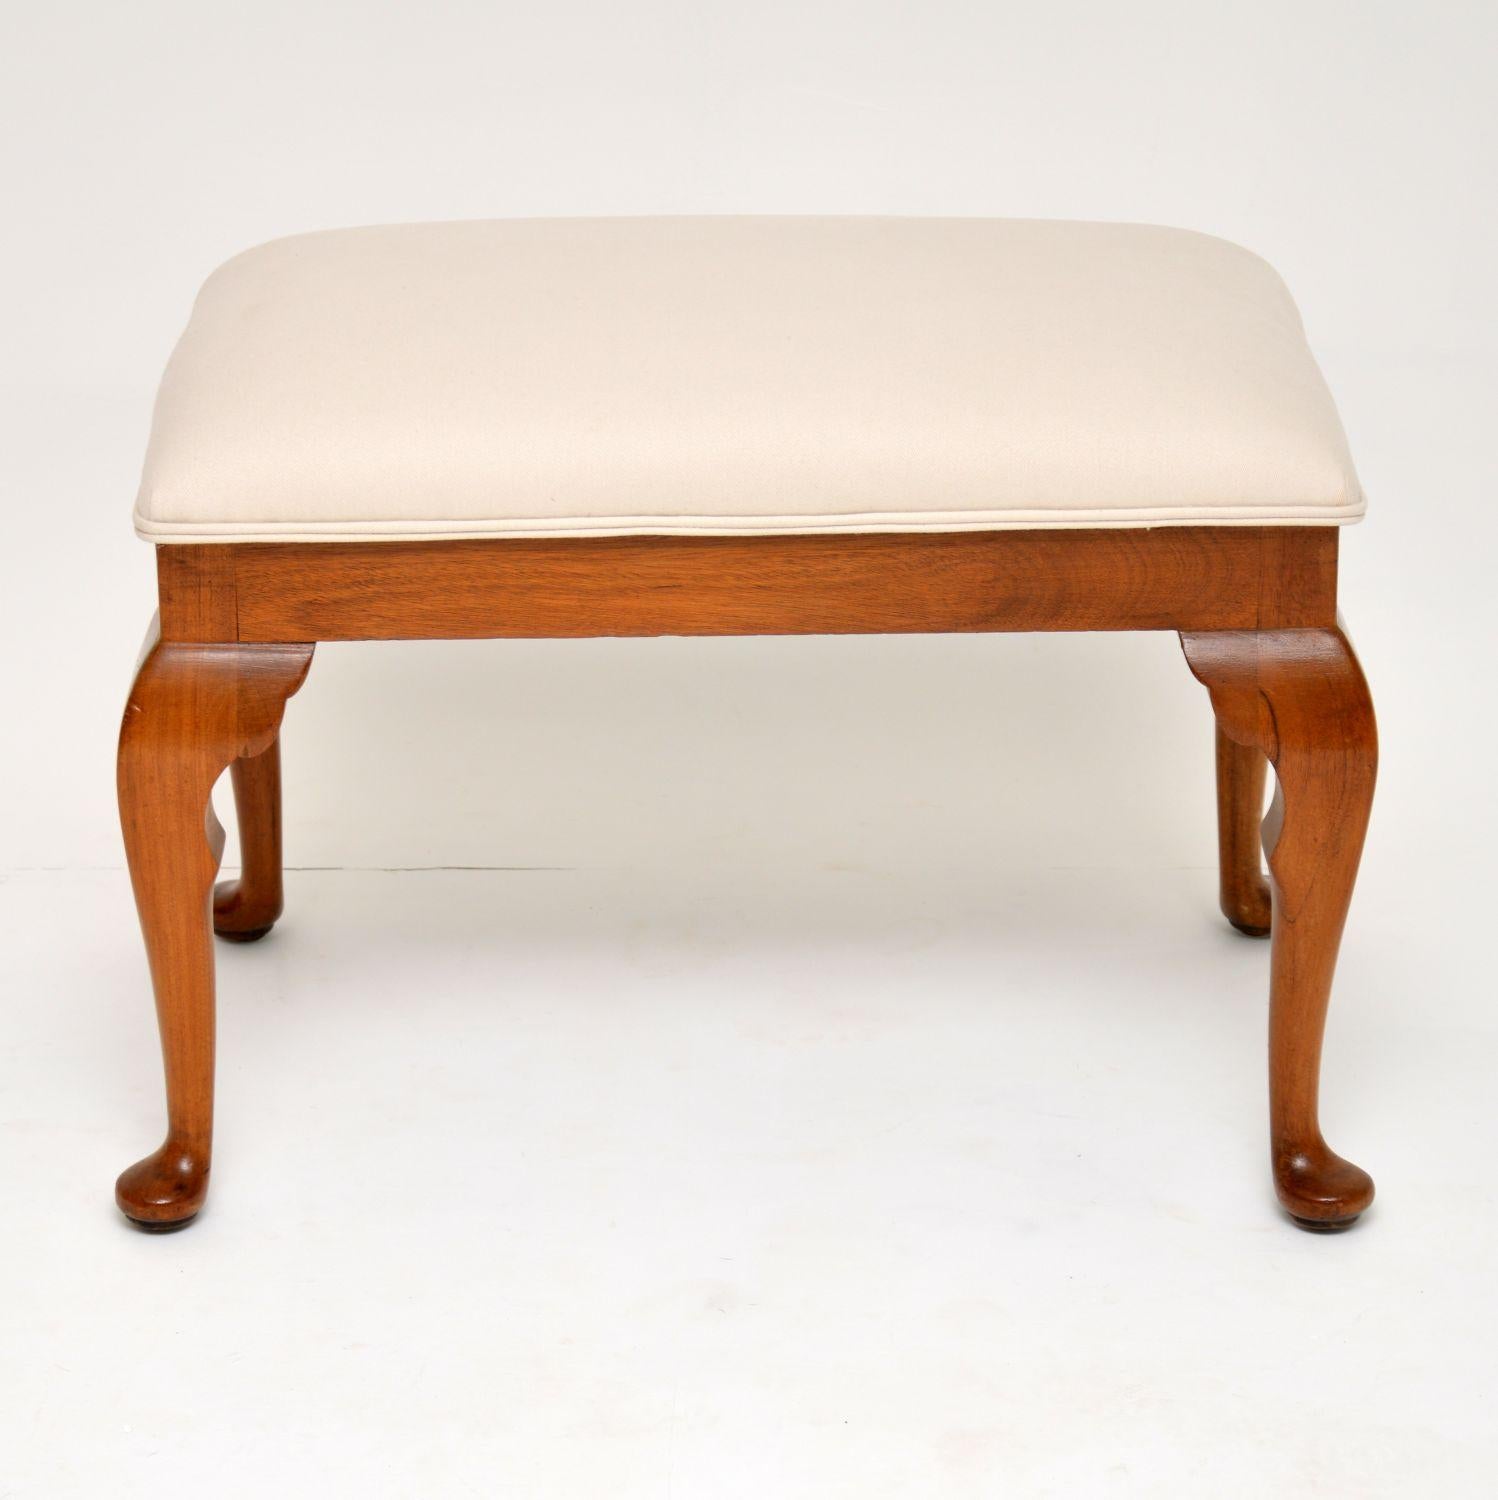 Antique solid walnut Queen Anne style stool in excellent condition, dating from circa 1910s-1920s period. It’s just been French polished and re-upholstered in our regular cream cotton linen fabric.

Measures: Width 28 inches, 70 cm
Depth 17